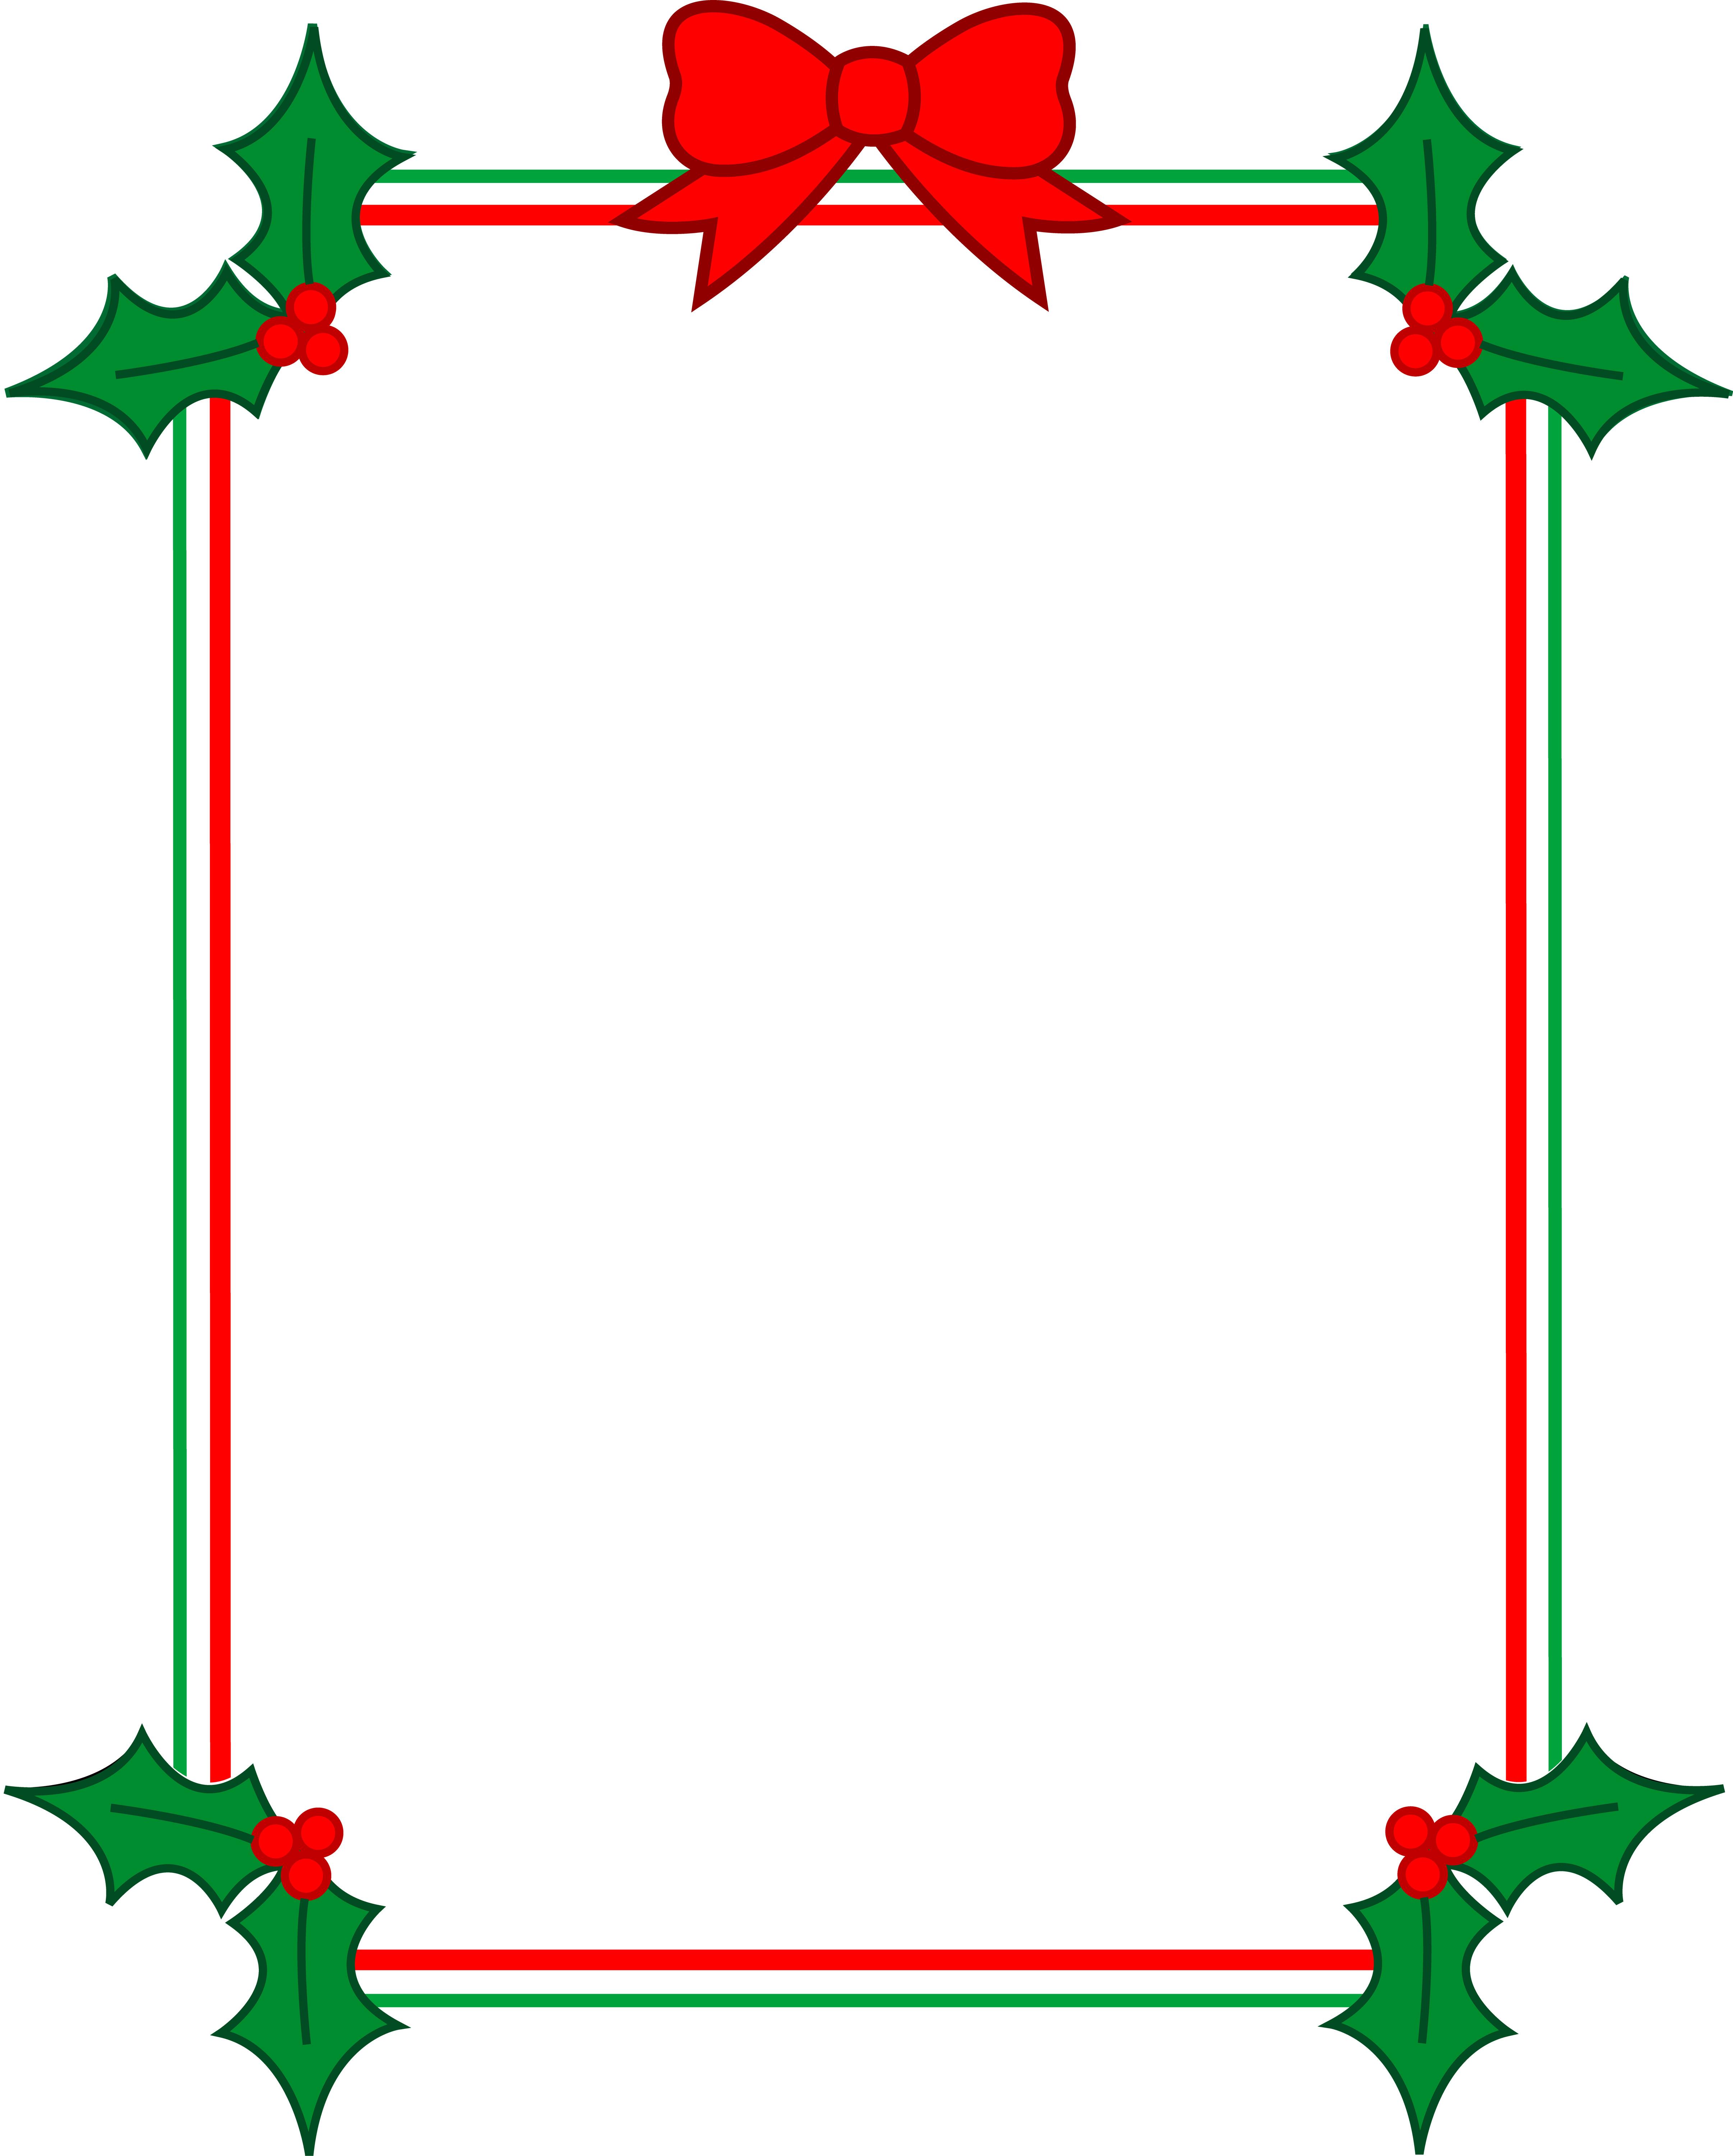 Christmas Template For Word from clipart-library.com